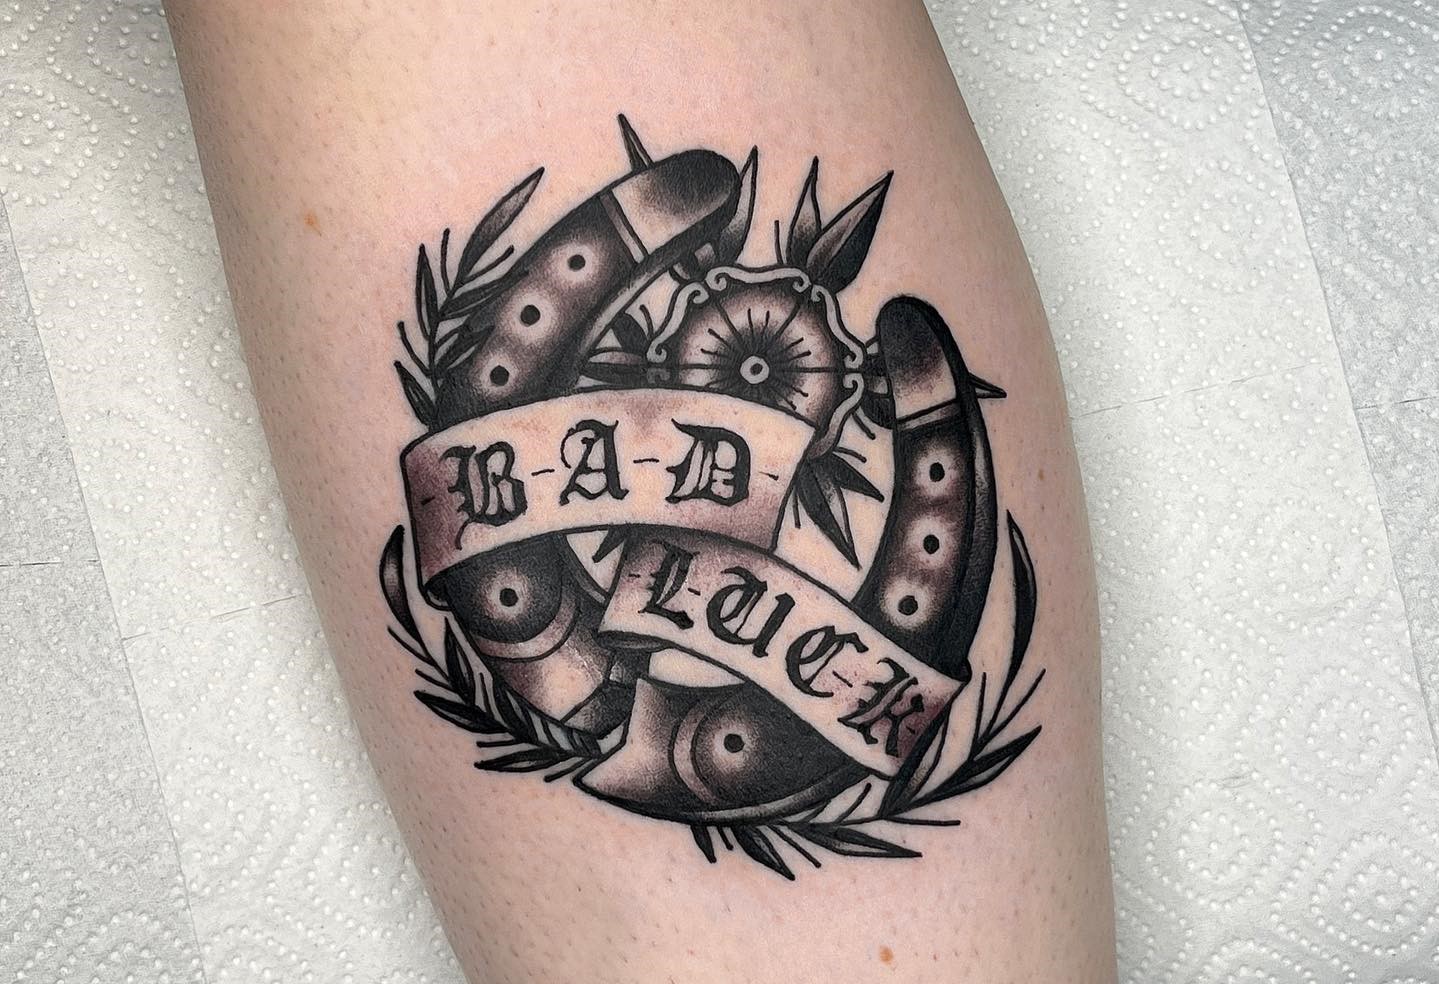 50 Bad Luck Tattoos and Their Meanings  Saved Tattoo